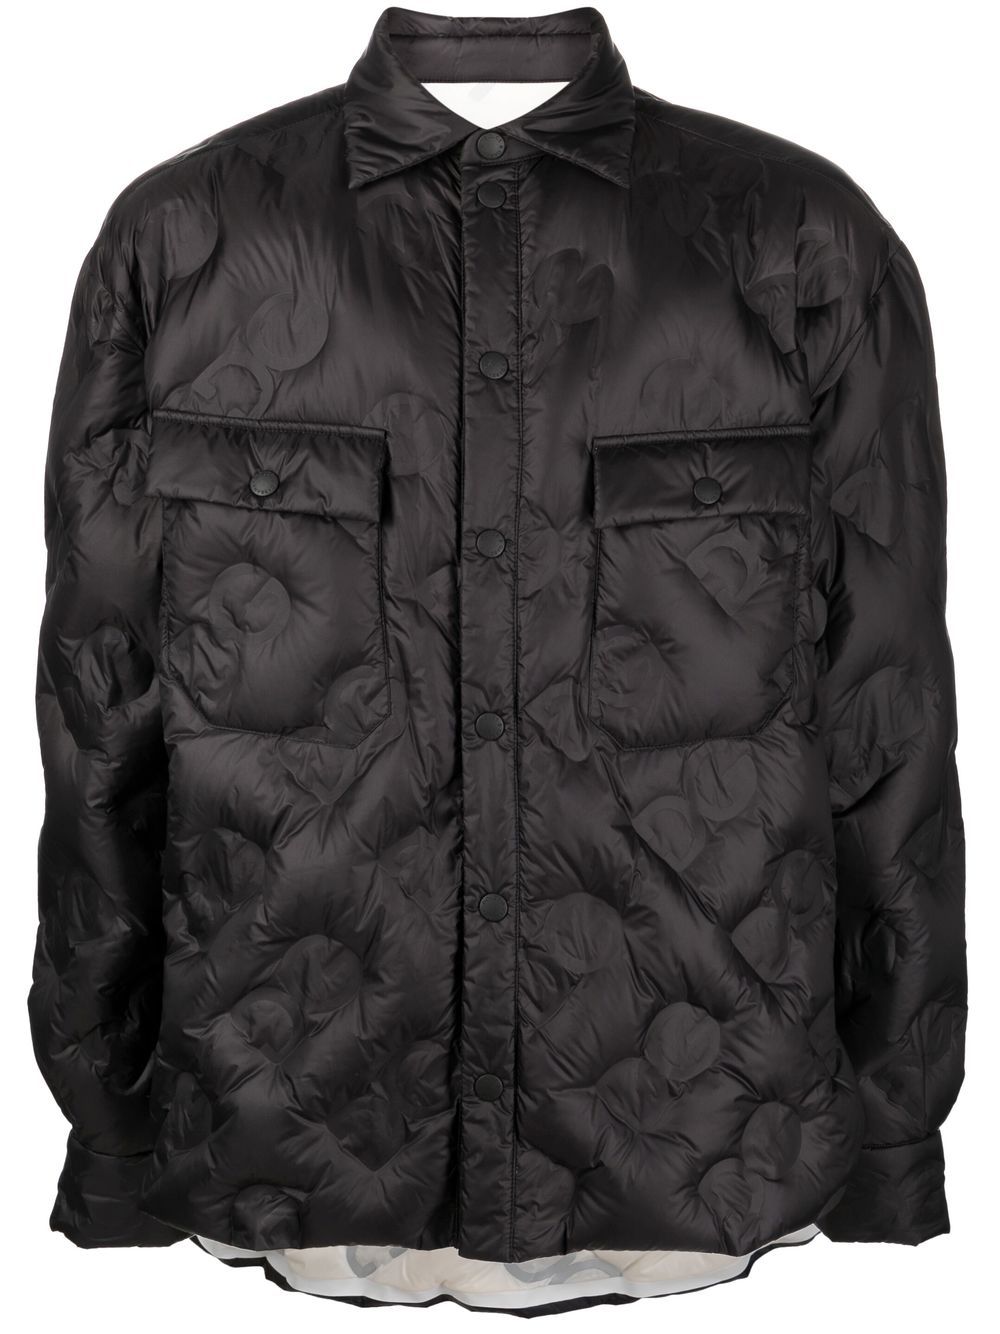 padded fitted jacket